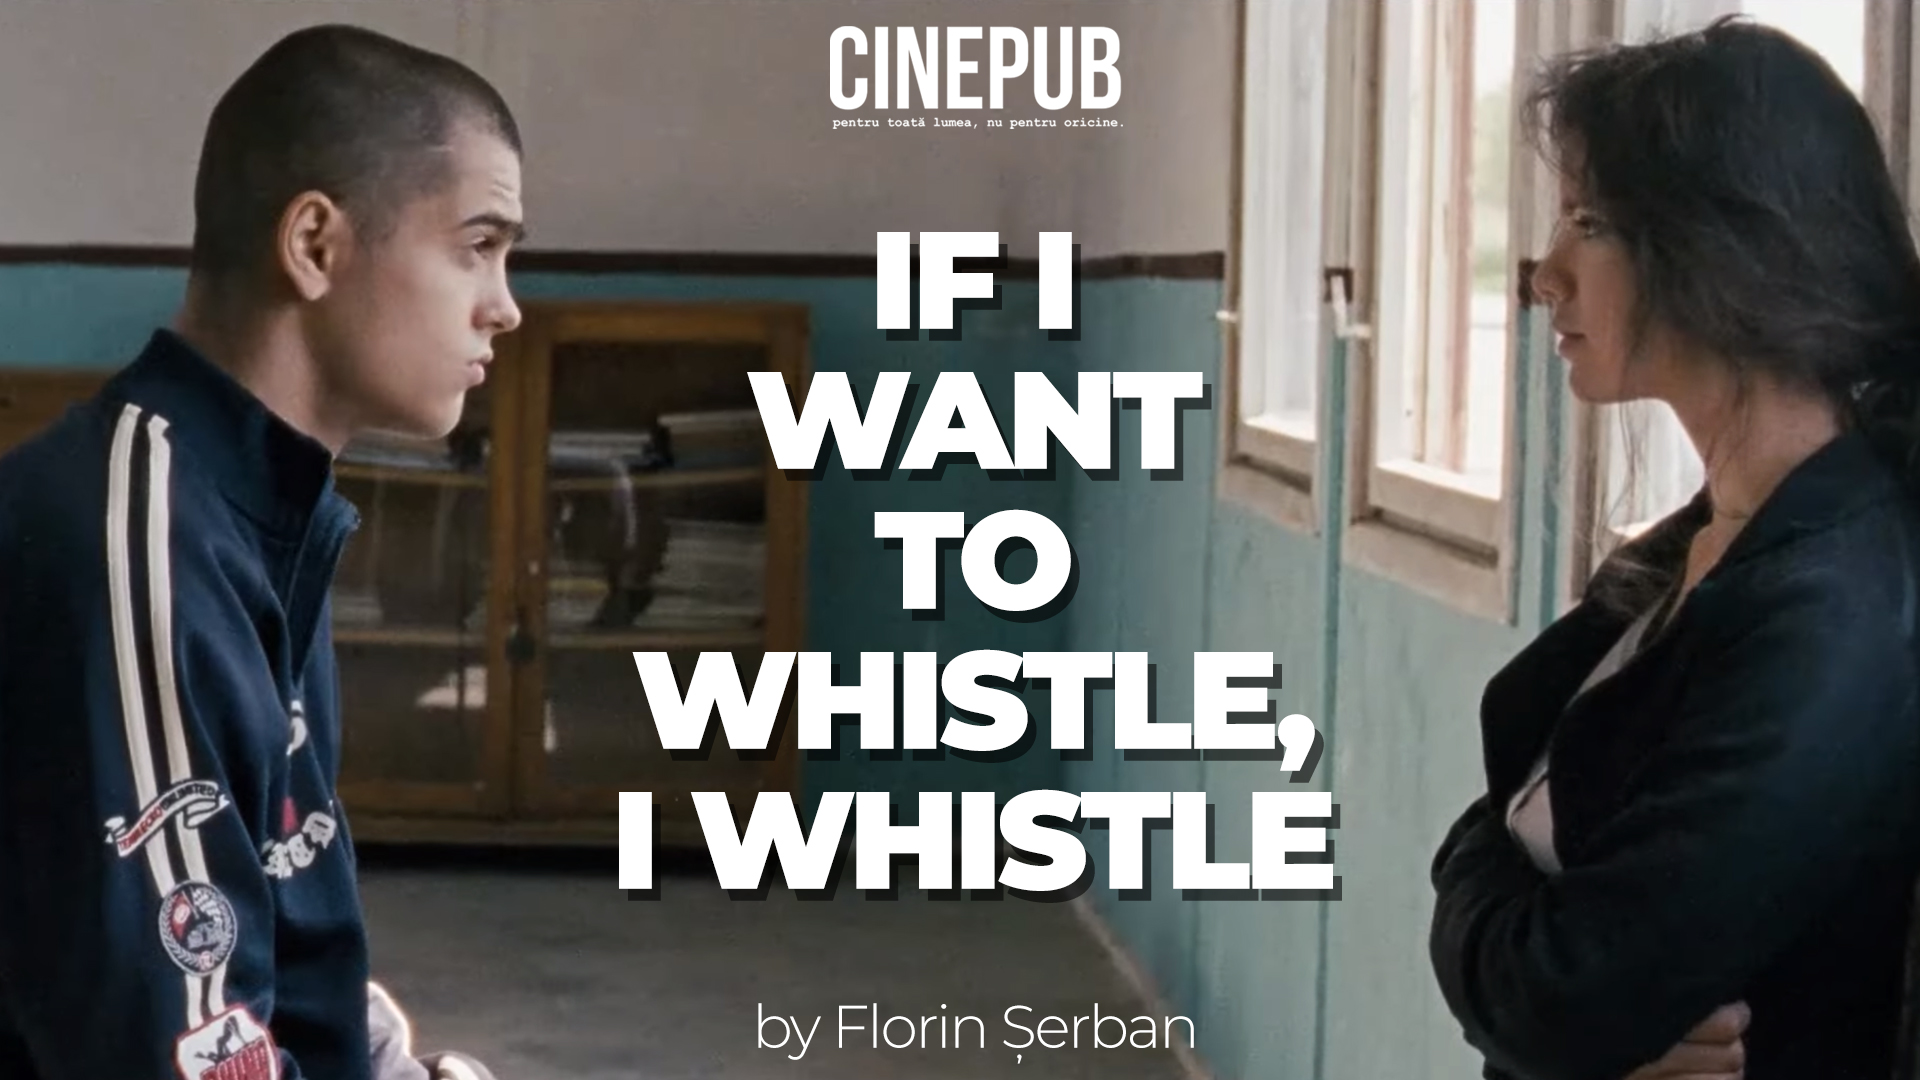 If I want to whistle, I whistle - by Florin Serban - feature film online on CINEPUB